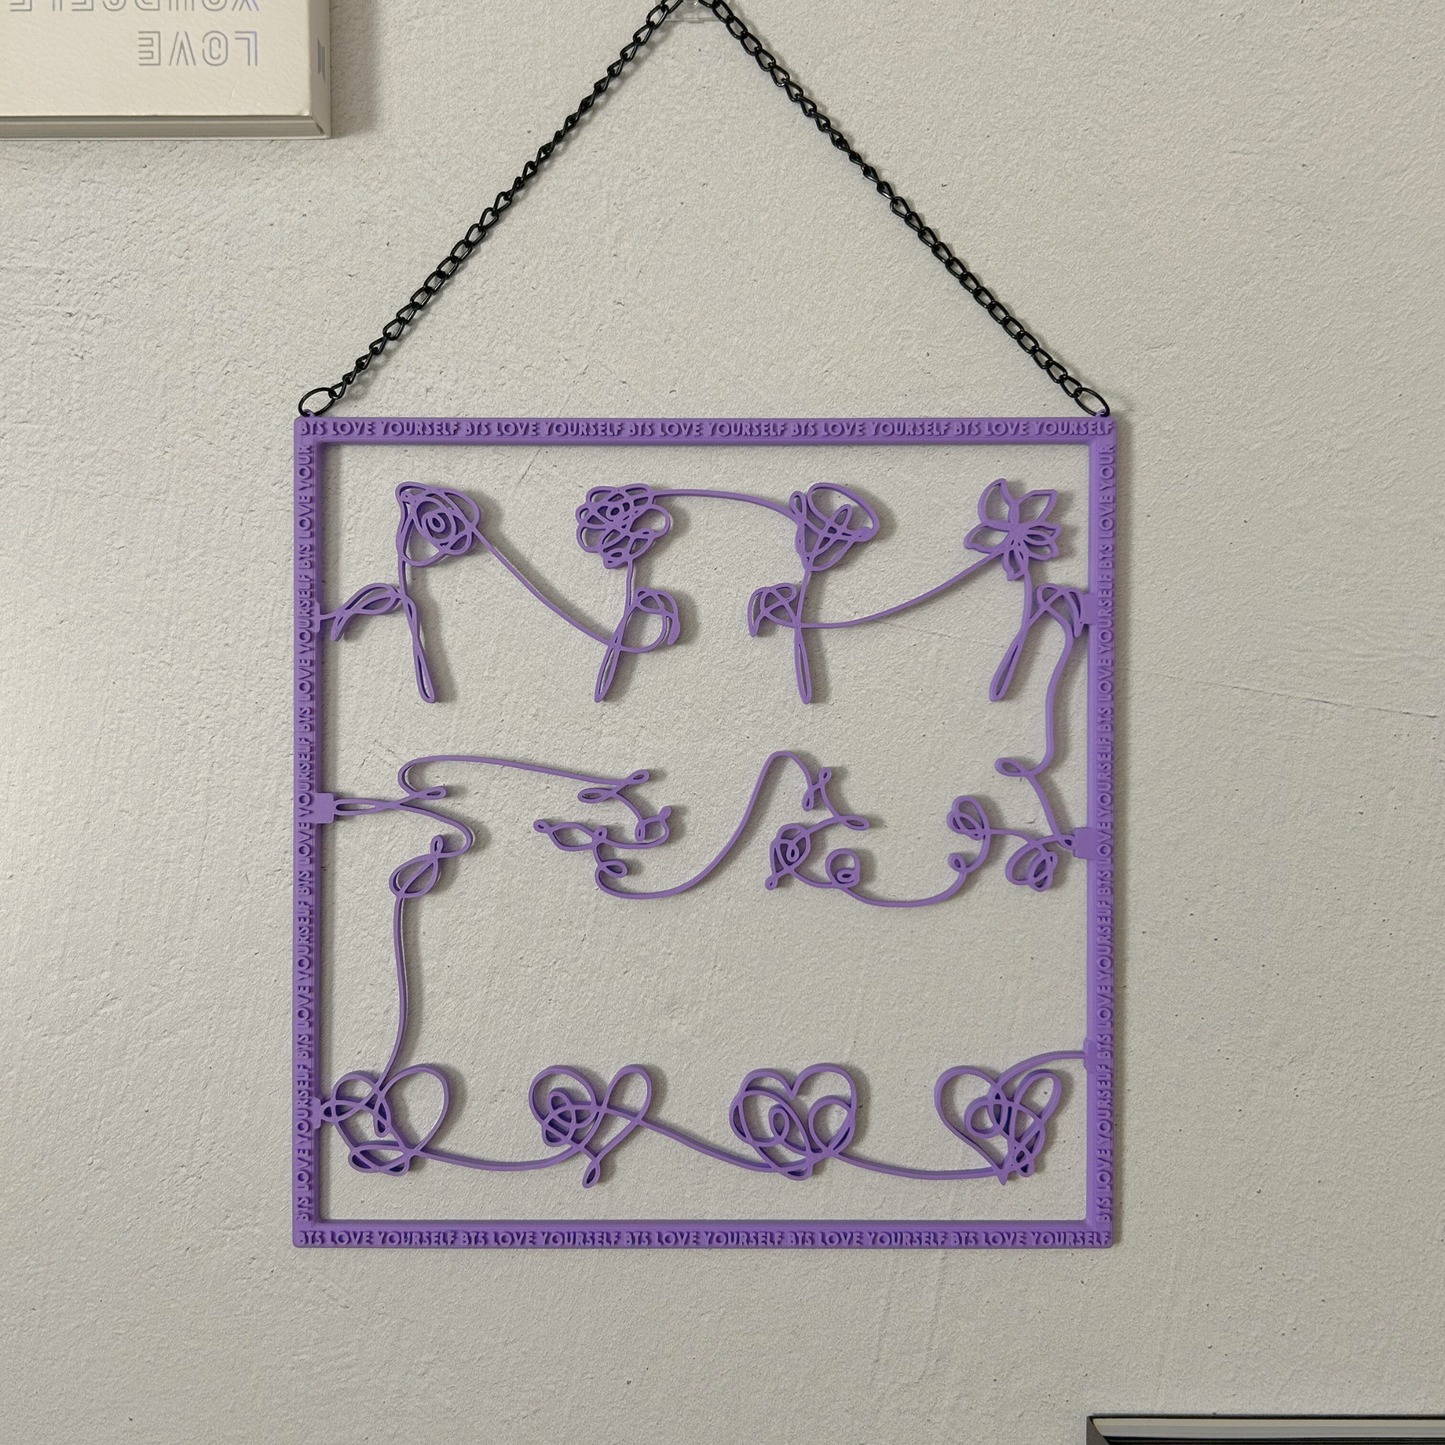 3D-Printed BTS Love Yourself Frame Wall Décor